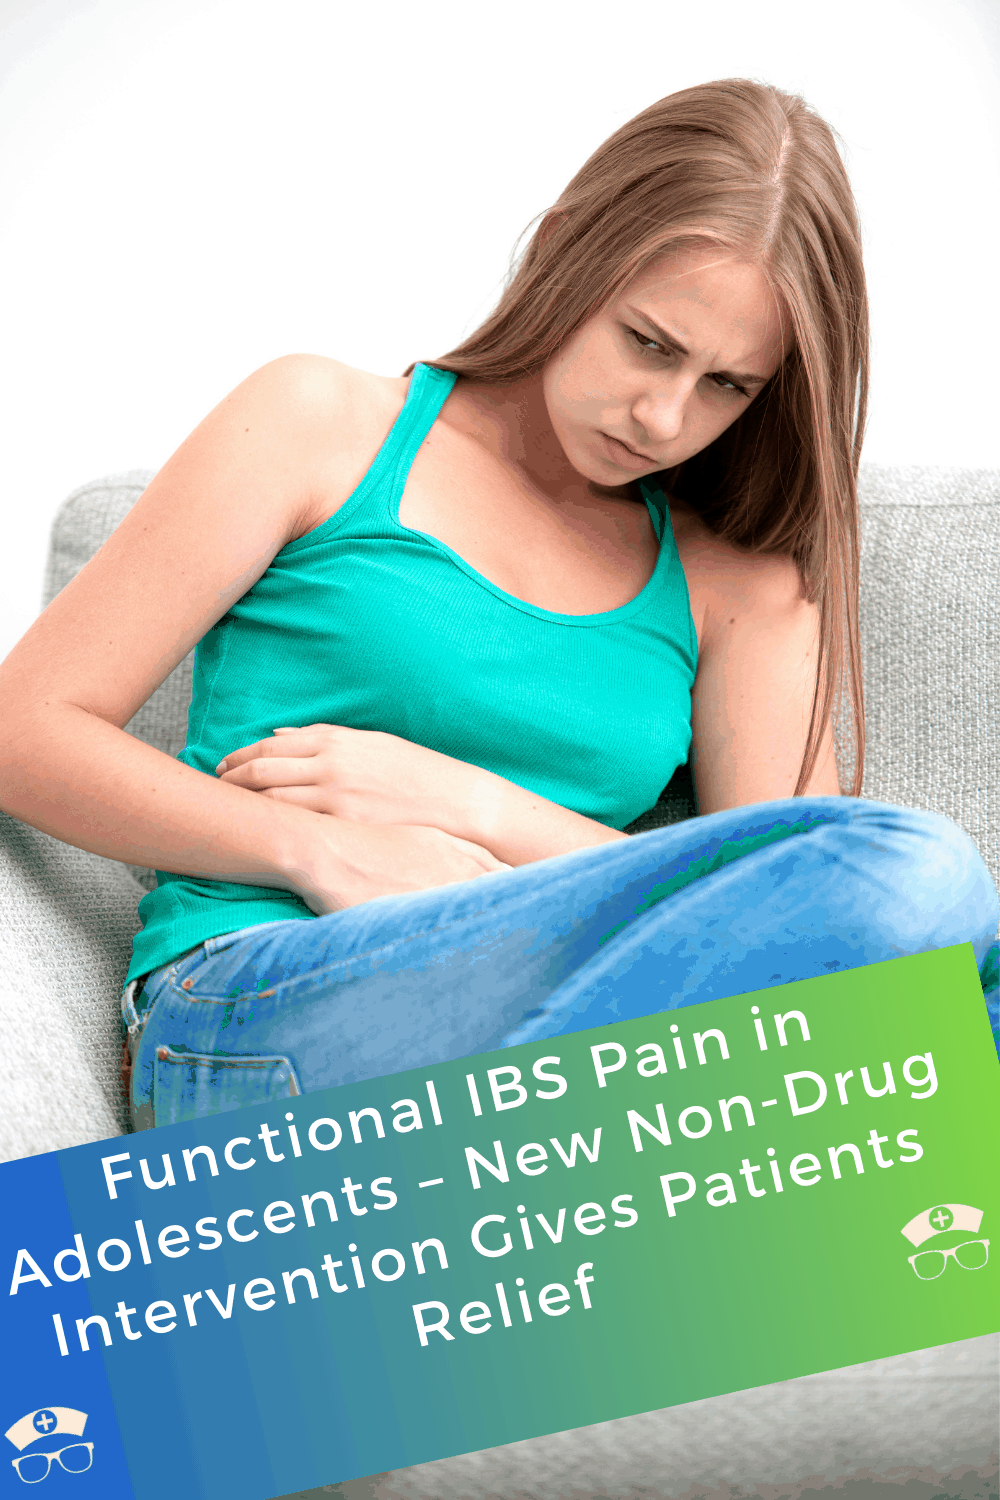 Functional IBS Pain in Teenagers (11-18 yo) - New Non-Drug Intervention Gives Patients Their Life Back.  IBS causes pain that interferes with daily life and can be debilitating. Management of IBS is difficult, and it can be even more challenging for children and teenagers. Thankfully you may now have non-drug treatment options that can give teens their pain relief. #ad #thenerdynurse #nurse #nurses #IBS #IBSinteens #IB-STIM #healthcare #non-drug